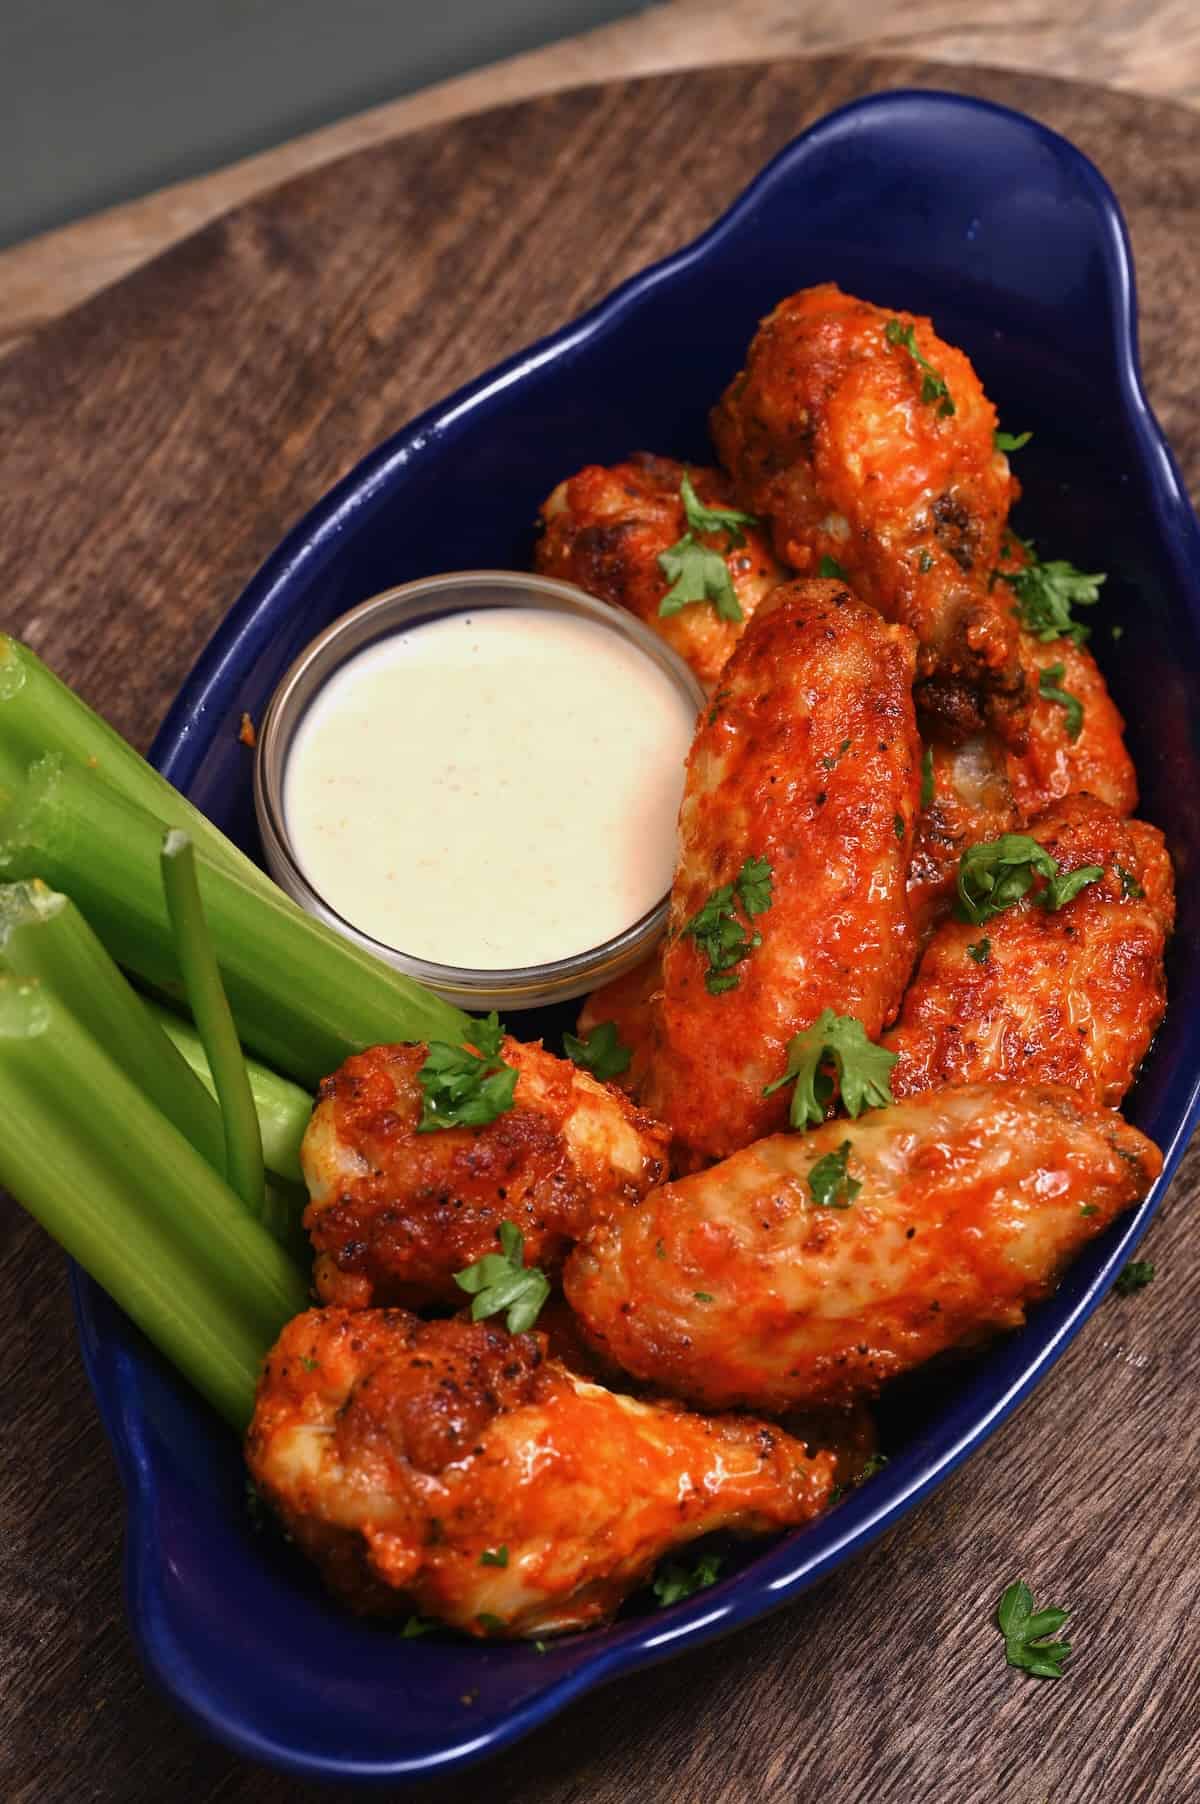 Chicken wings with celeri and alabama white sauce